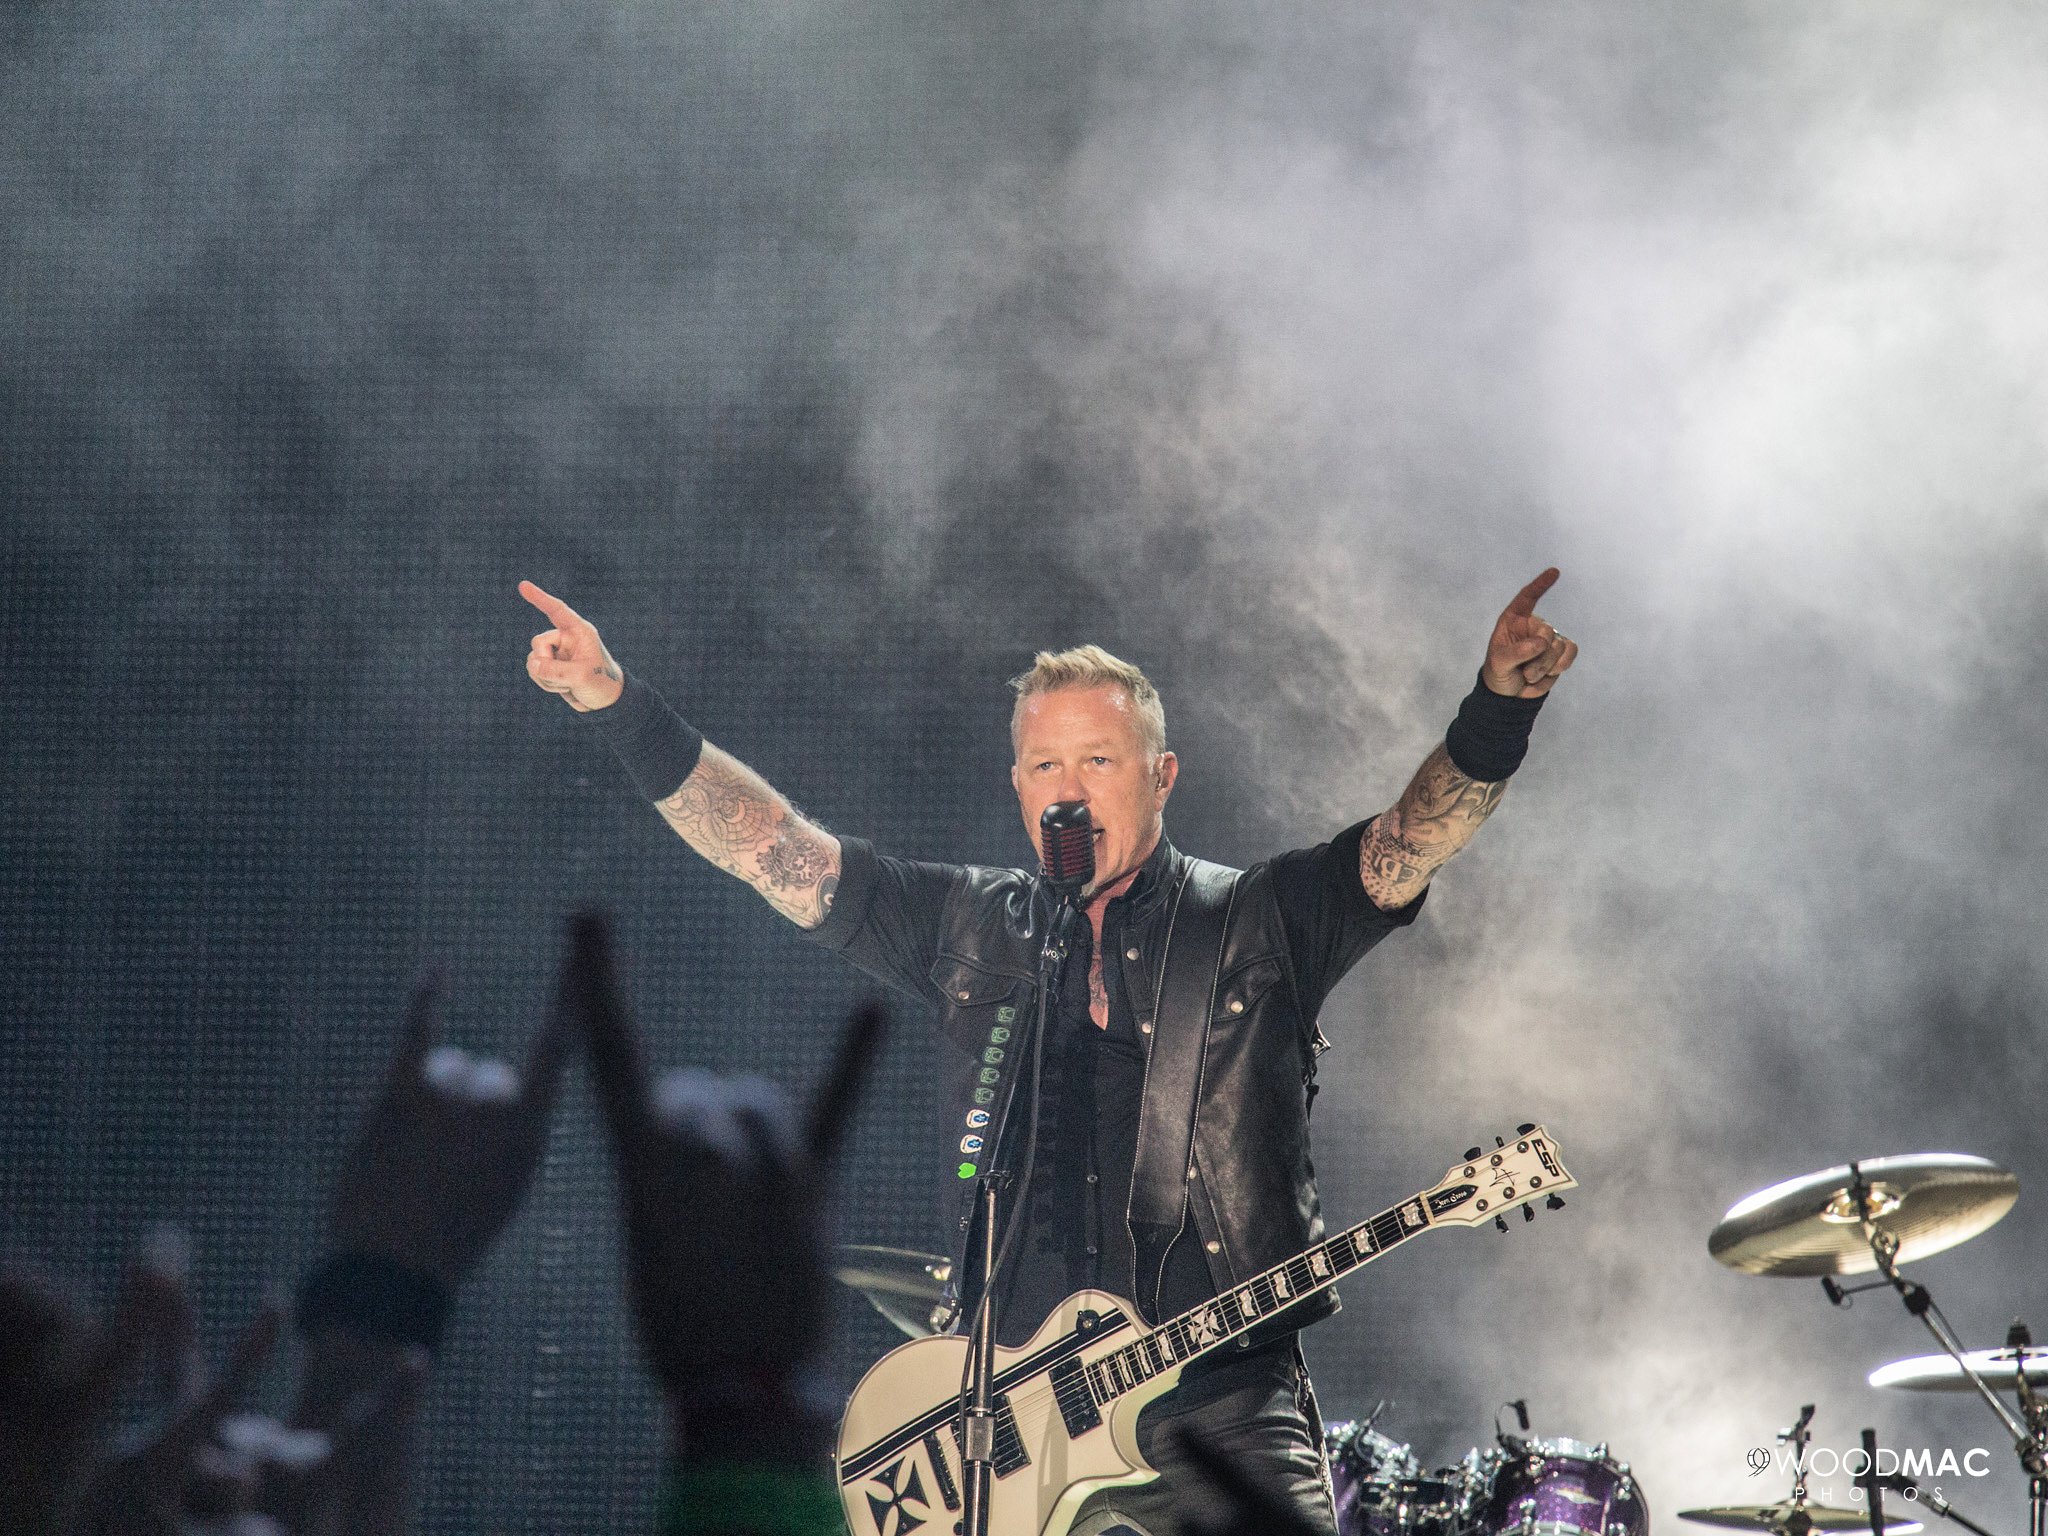 Happy birthday, James Hetfield! Some of my favorite photos from that night!   